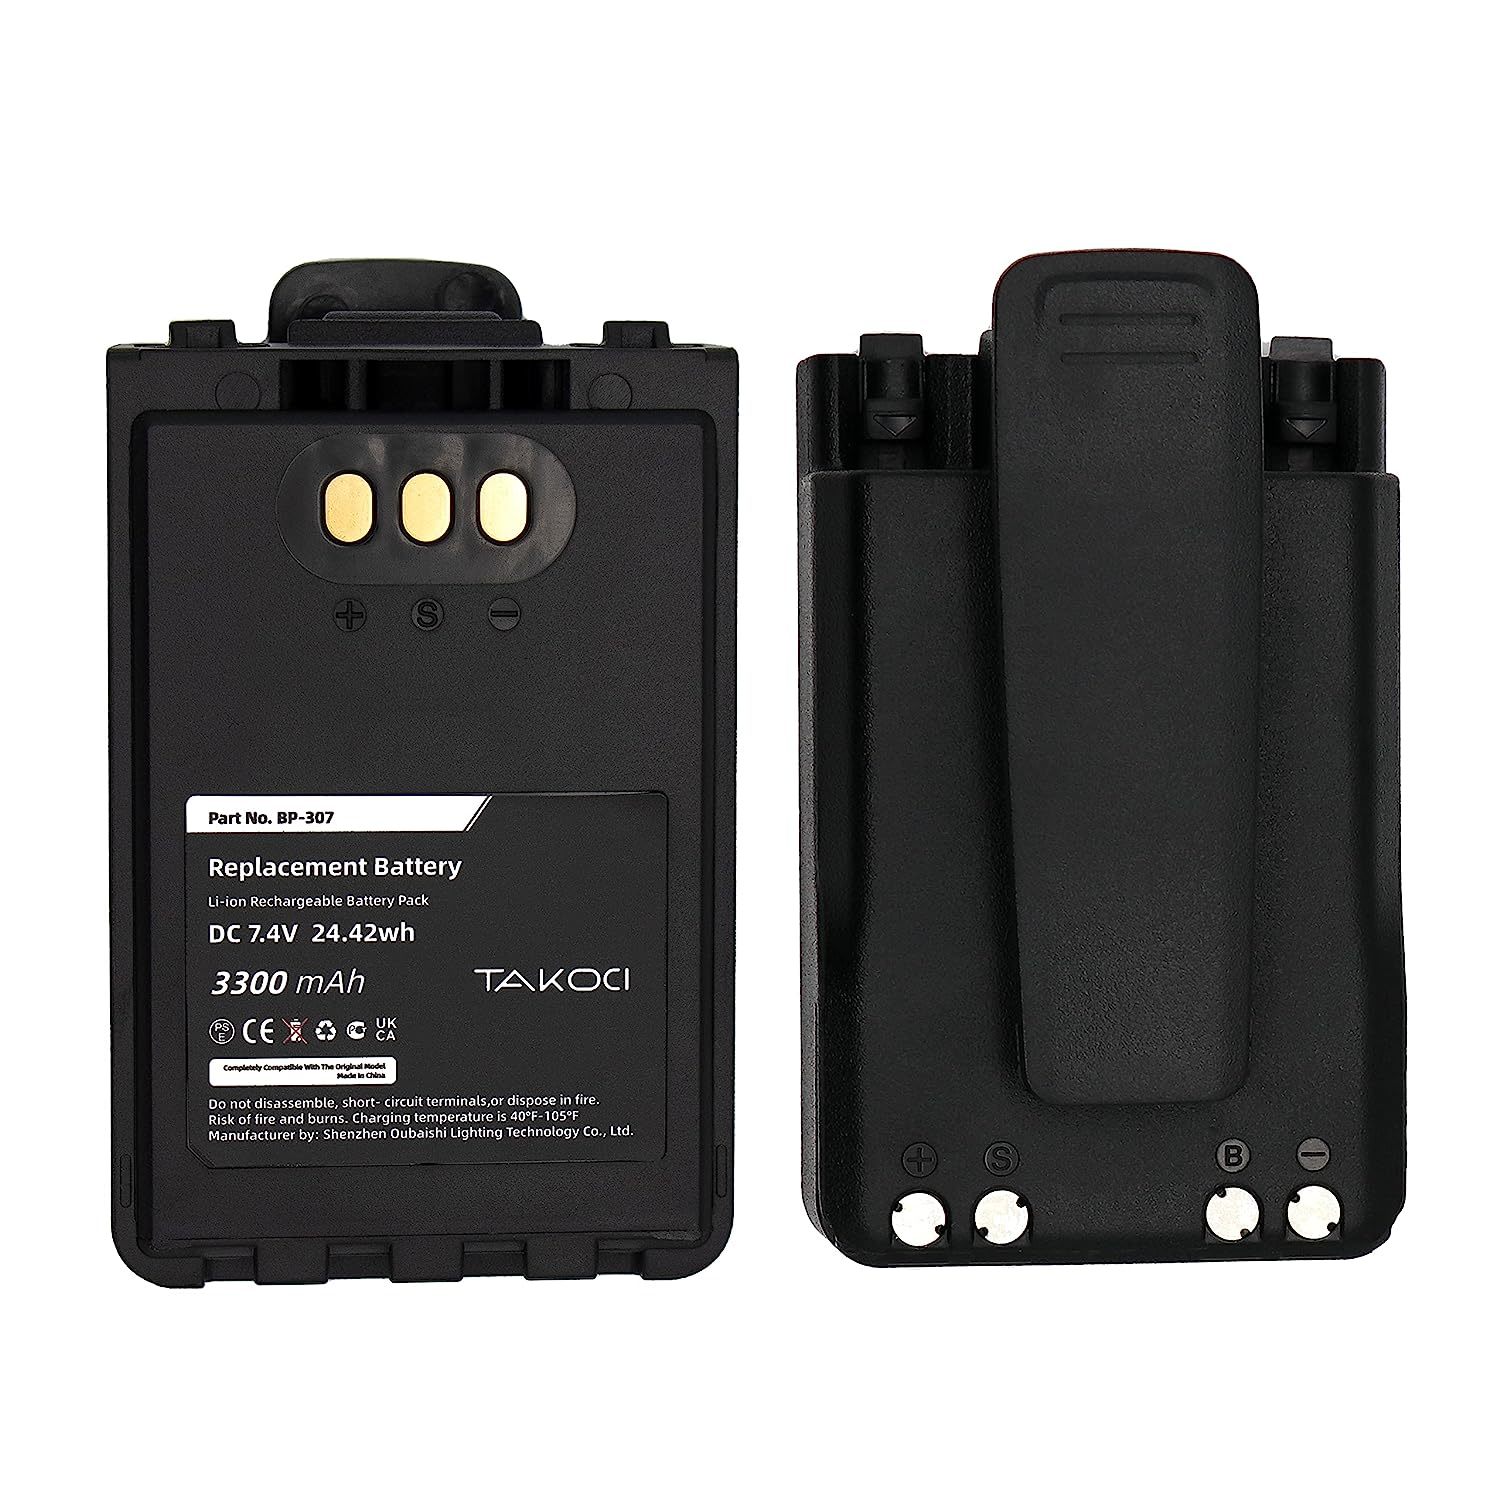 Replacement Battery For Icom Bp-307 Ic-705 Id-31E Id-51E Id-52E Ip-100H Ip-501H  - $58.99